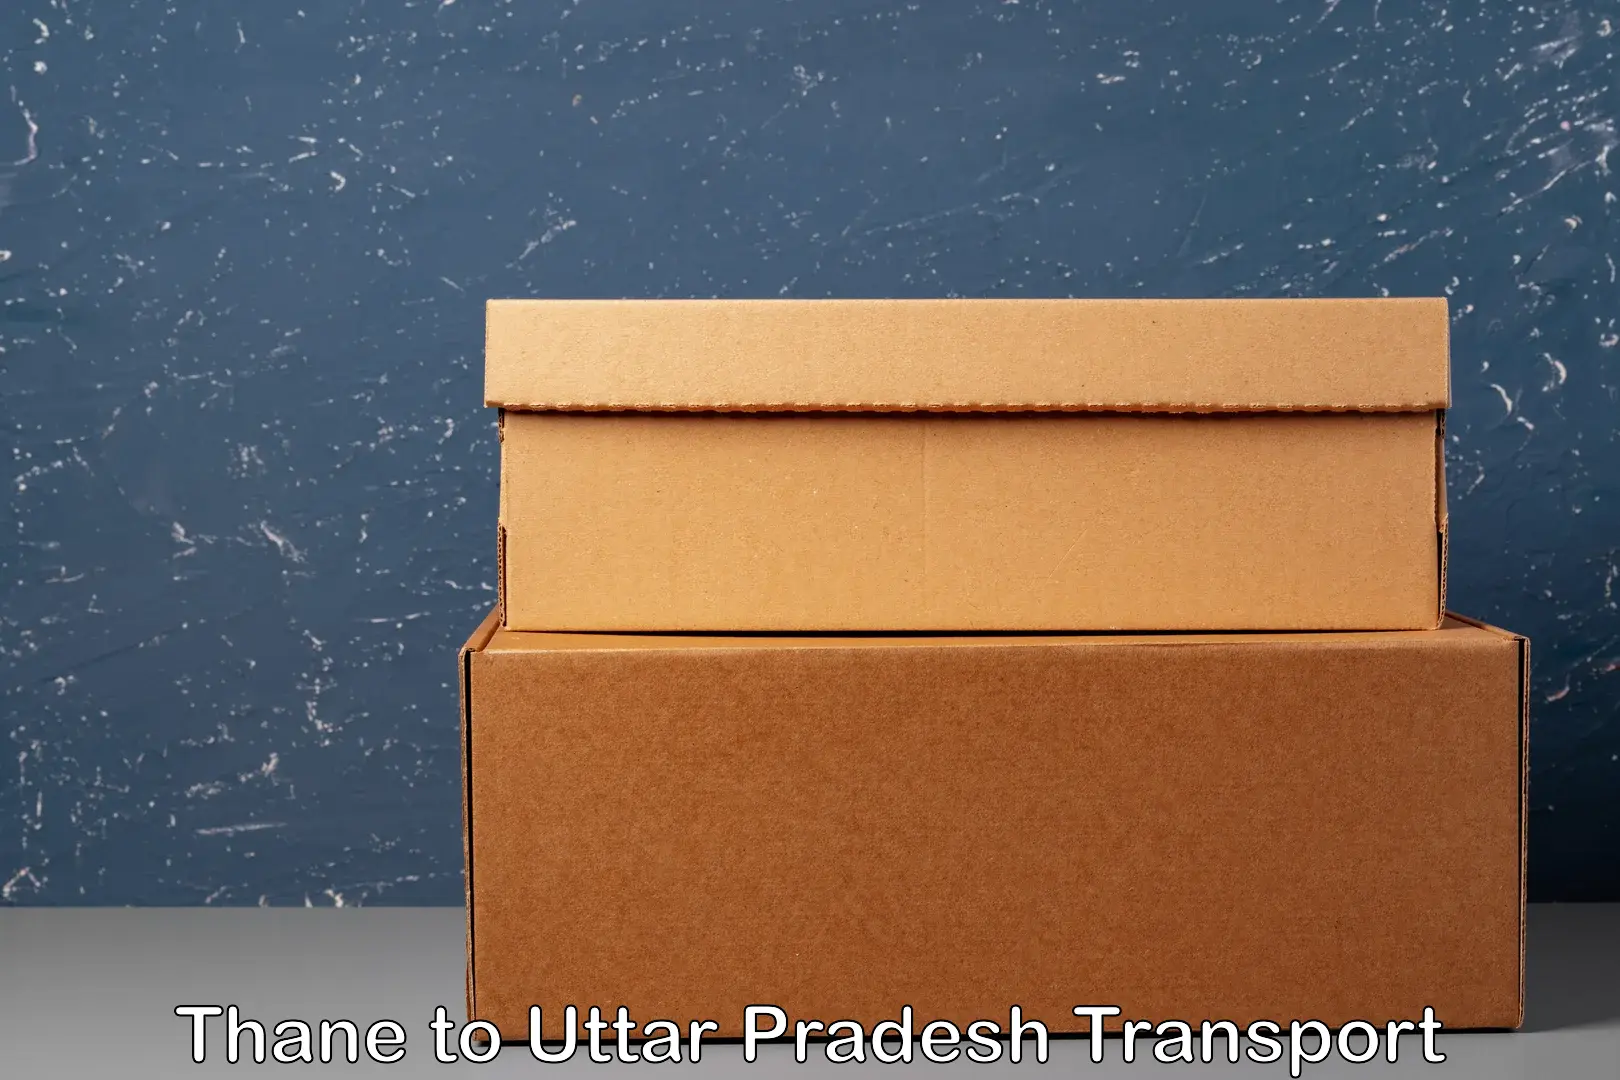 Air cargo transport services Thane to Rath